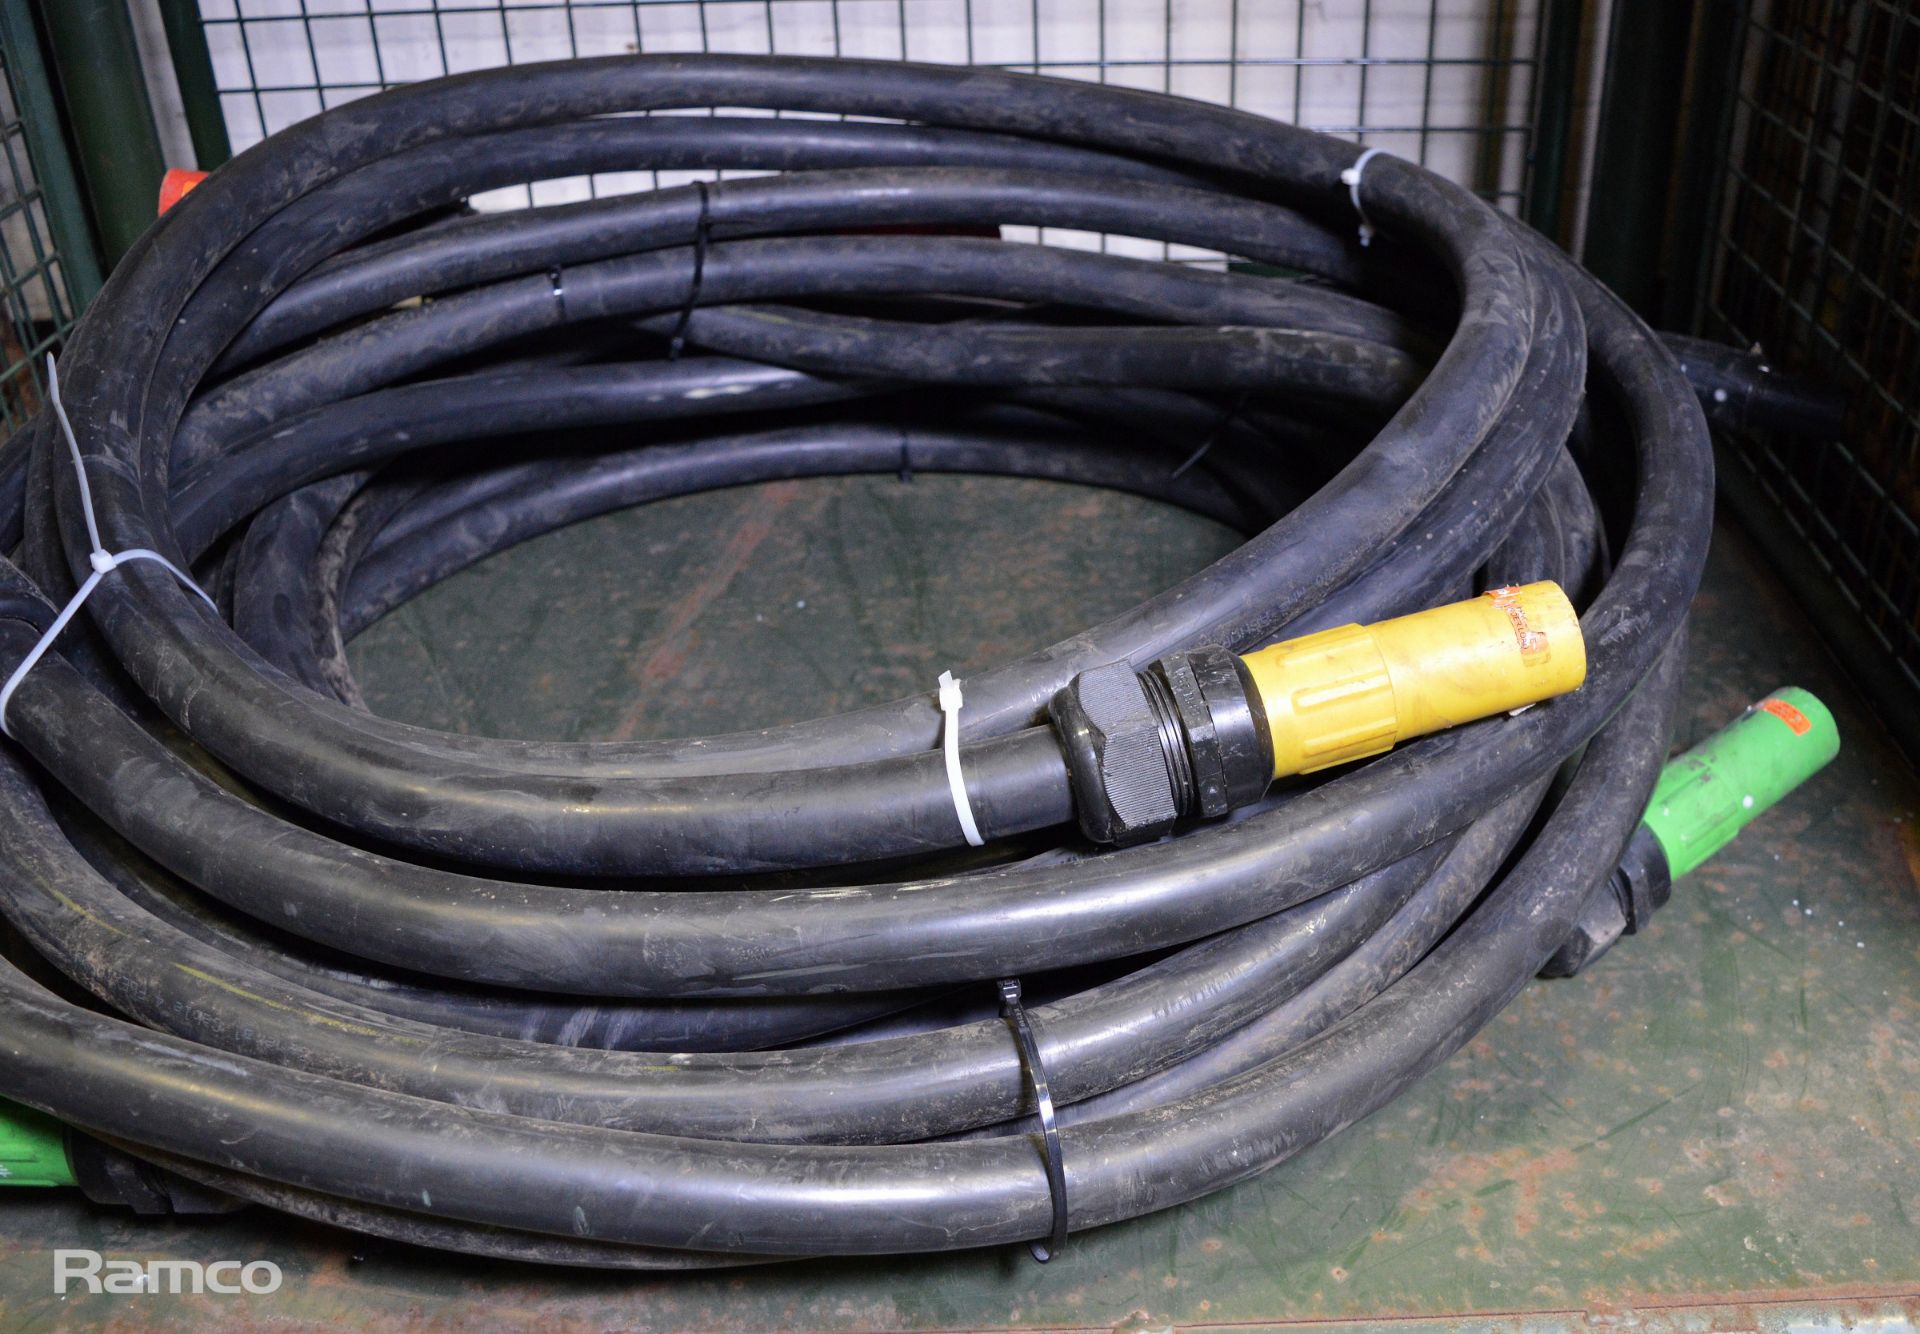 5x Heavy duty extension cable with M/F coupling 600vac 660amp - Image 2 of 3